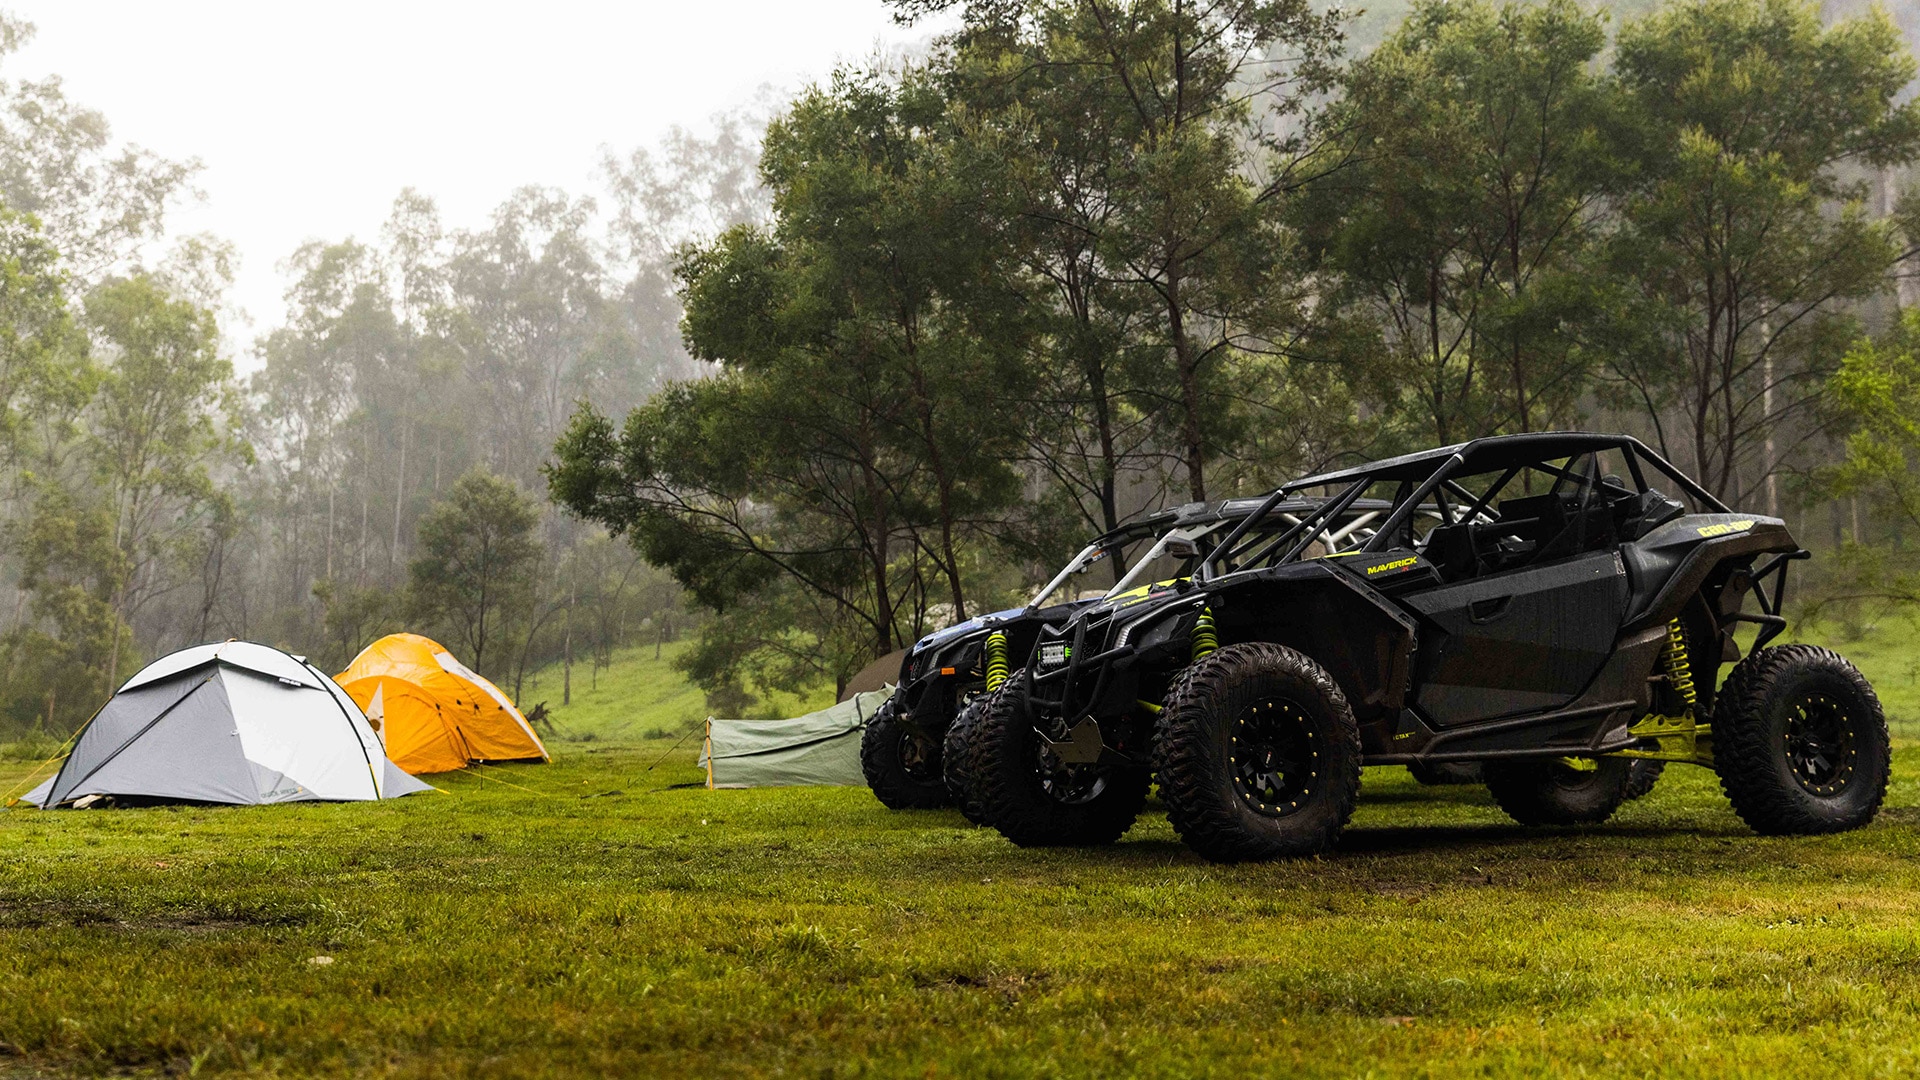 Can-Am Off-Road vehicles near camp tents